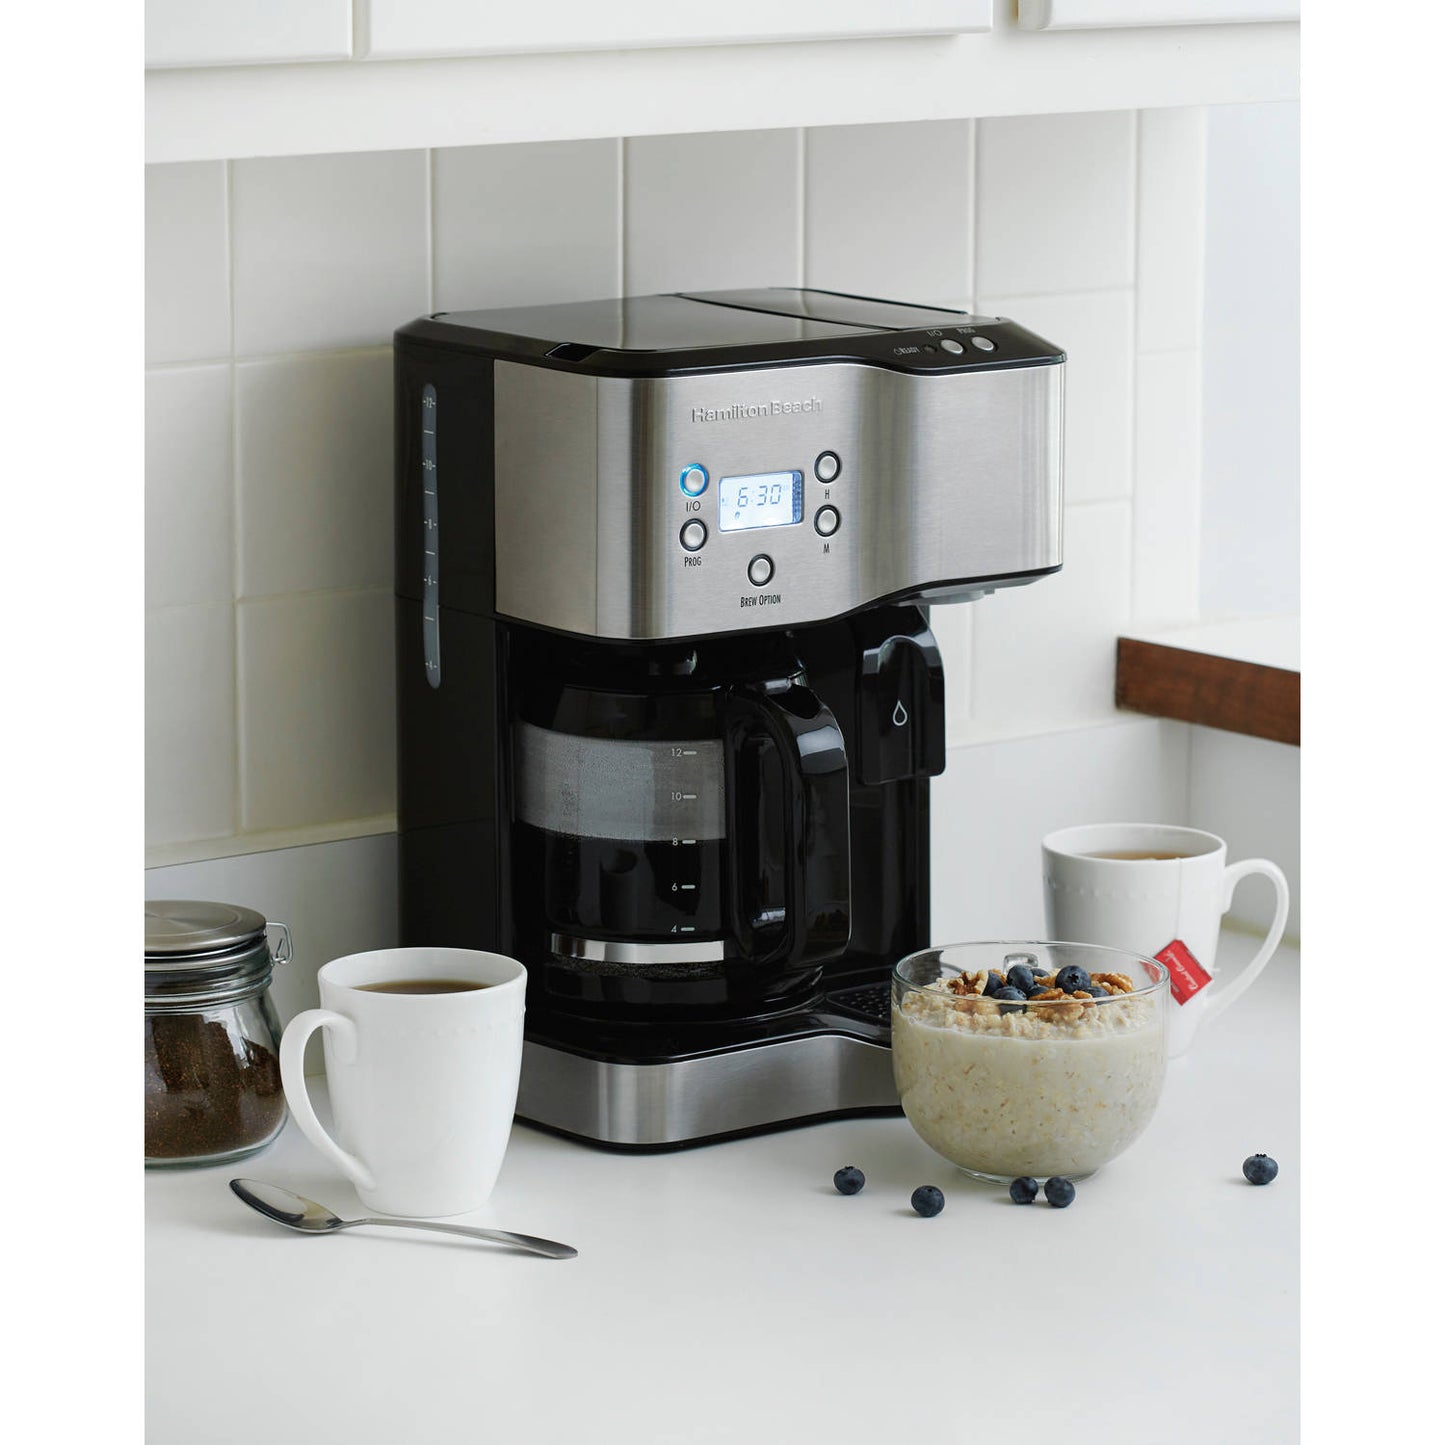 Hamilton Beach 12 Cup Coffeemaker with Hot Water Dispensing | Model# 49982